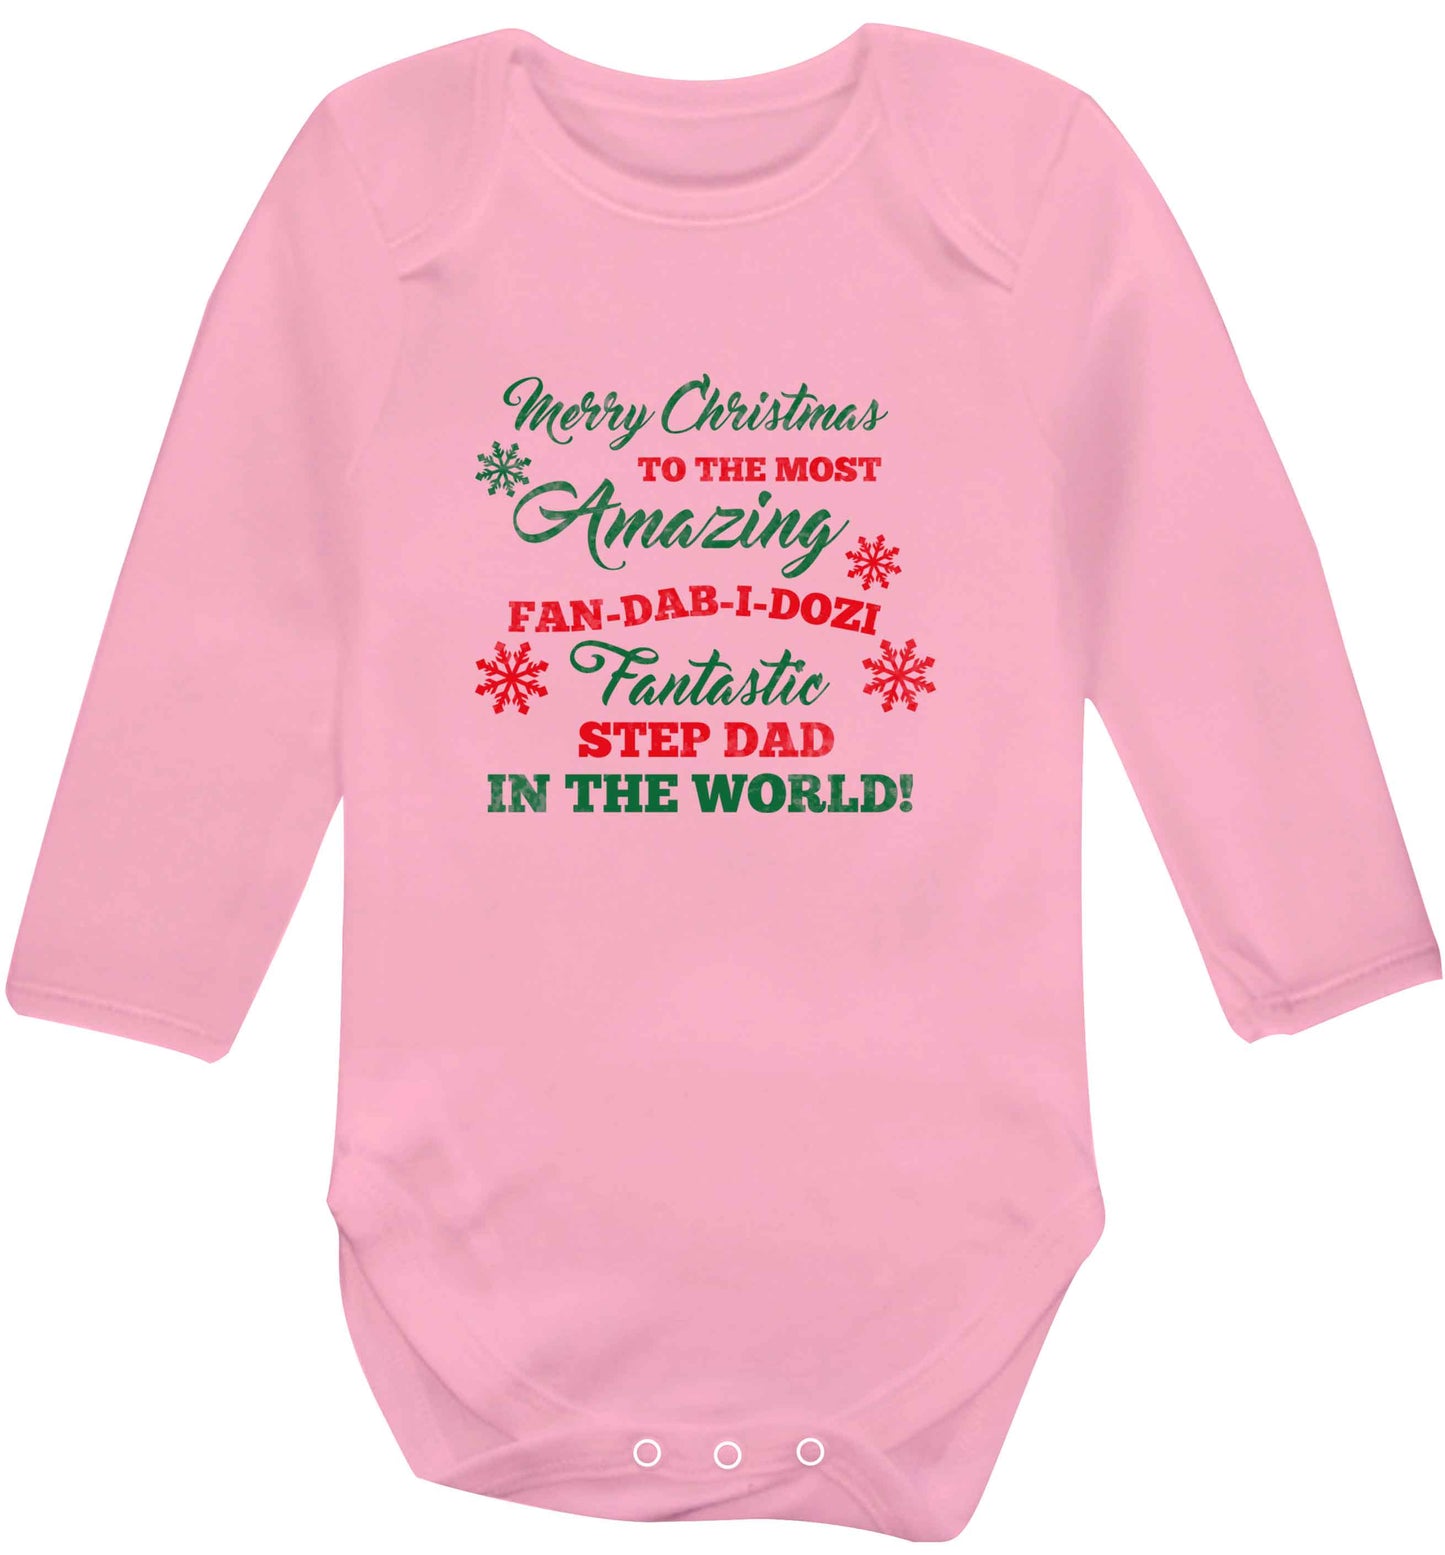 Merry Christmas to the most amazing fan-dab-i-dozi fantasic Step Dad in the world baby vest long sleeved pale pink 6-12 months